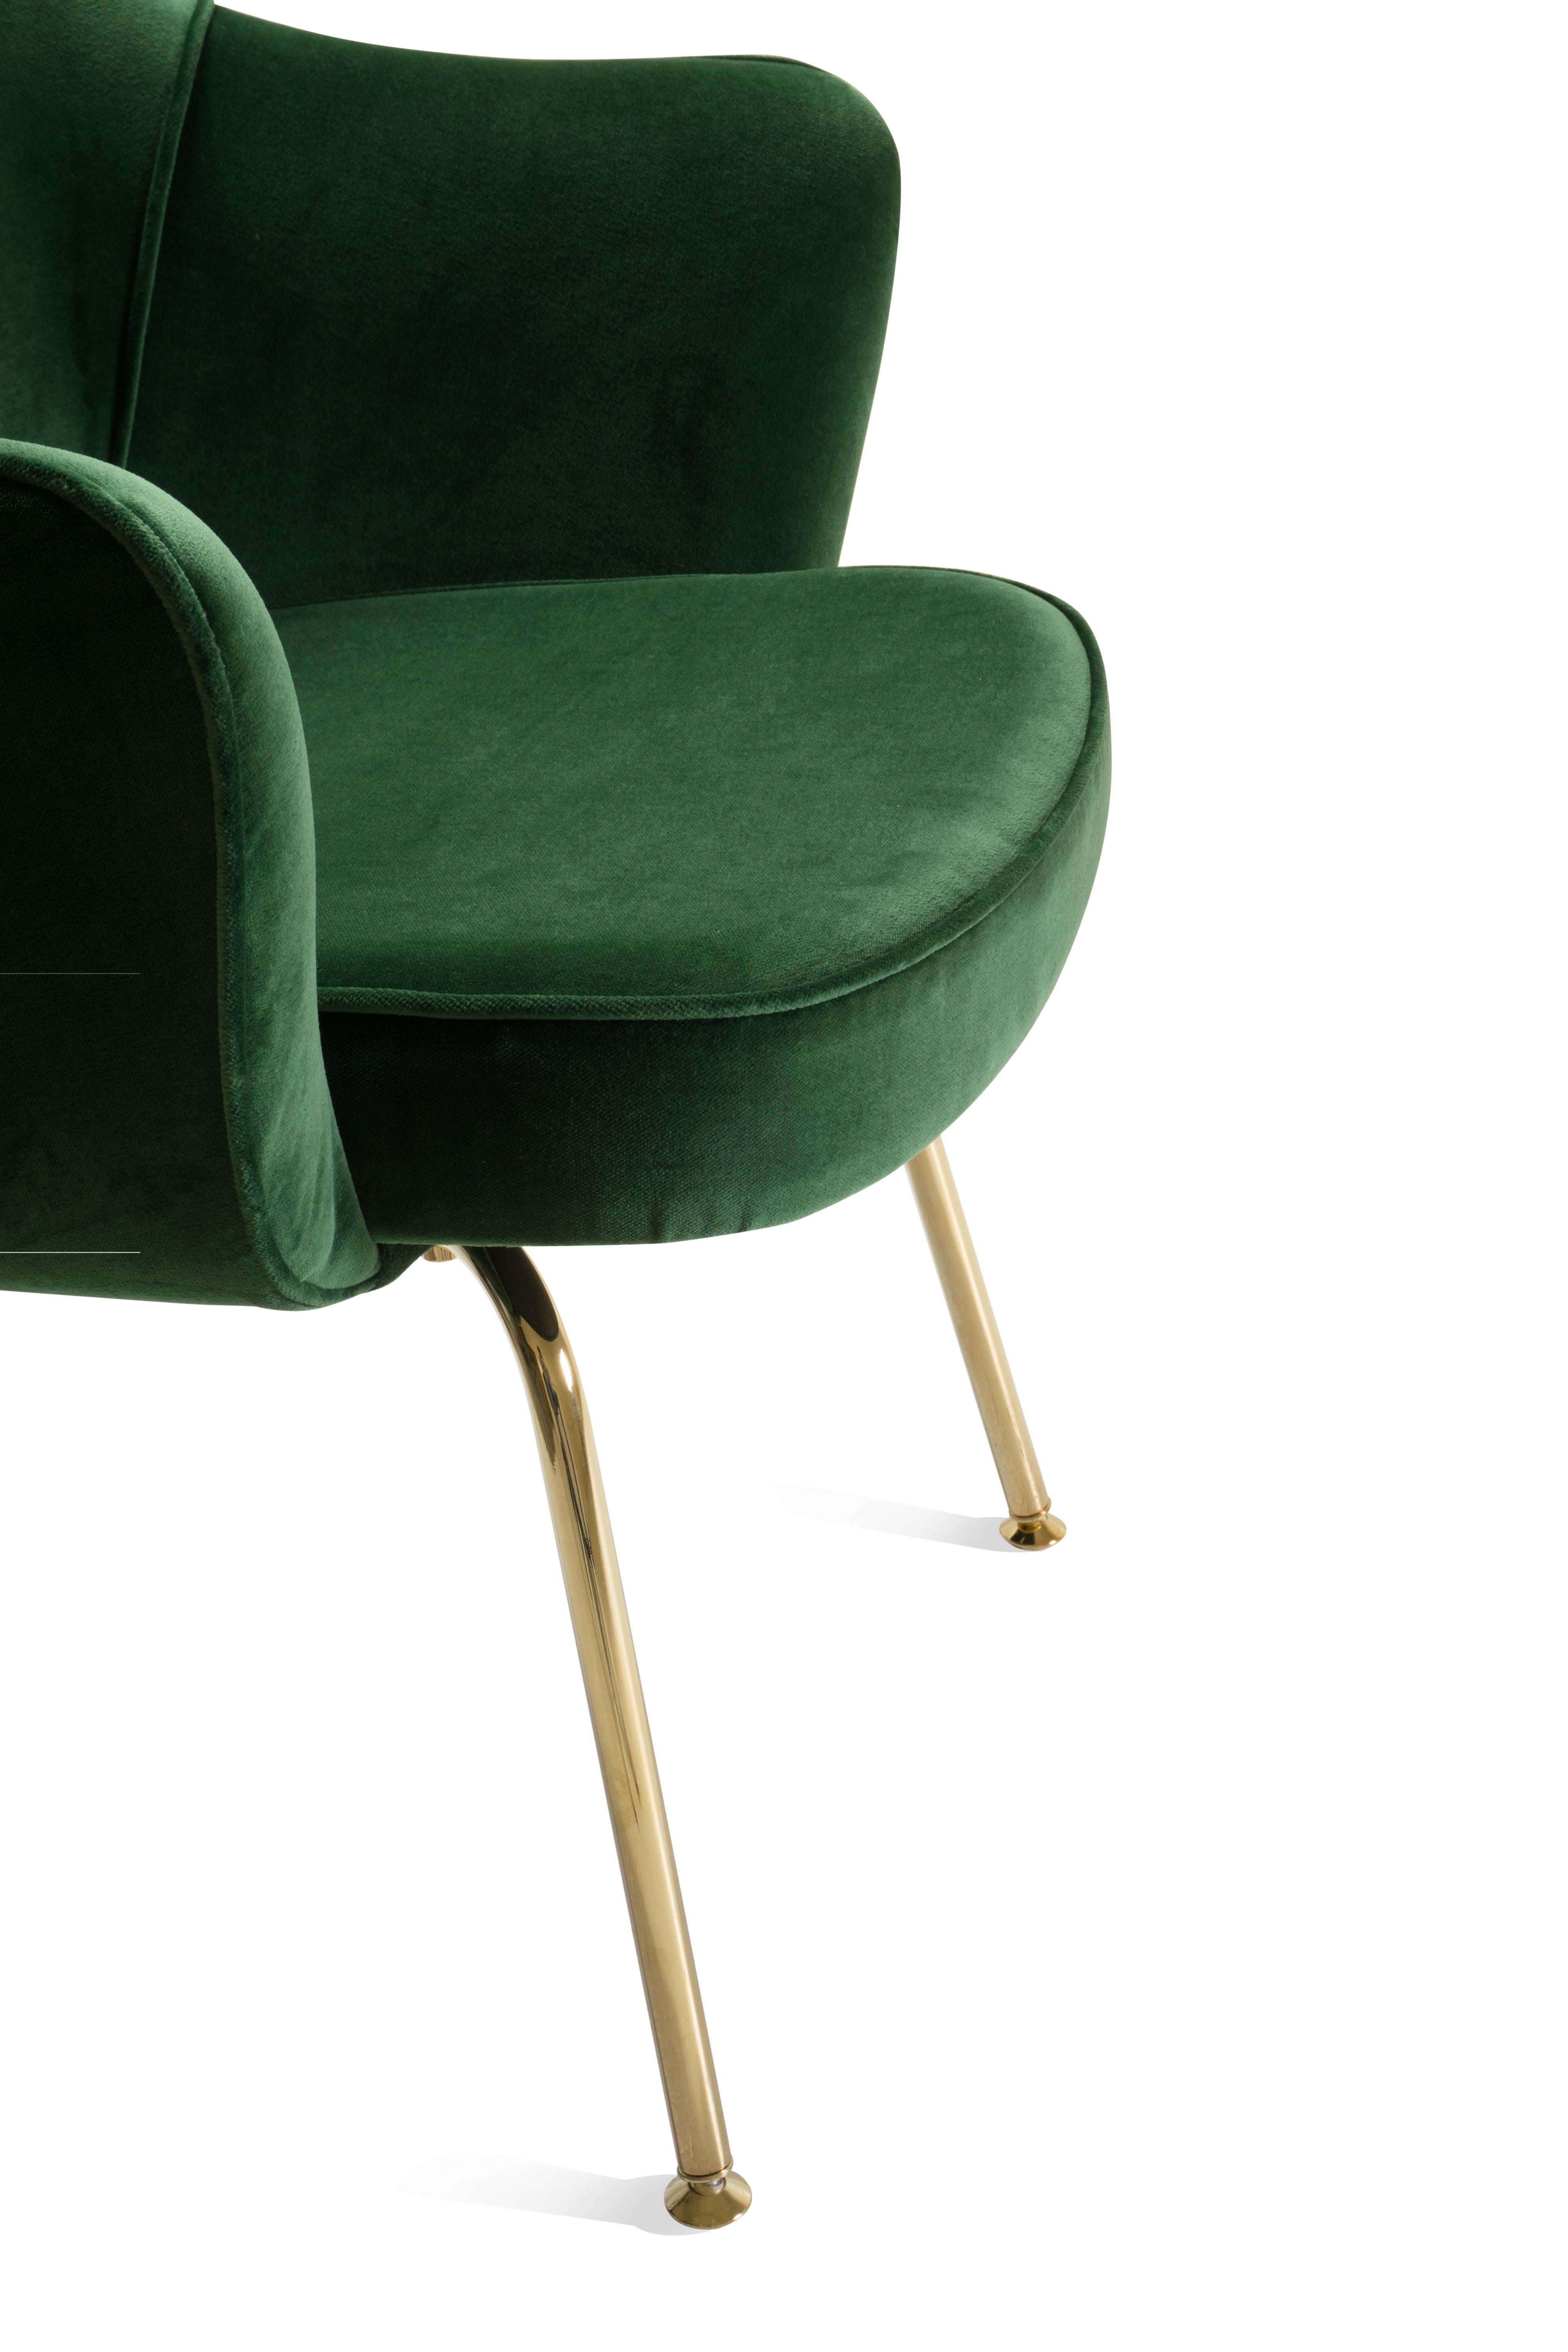 Plated Saarinen Executive Arm Chairs in Emerald Velvet, Gold Edition, Set of 6 For Sale